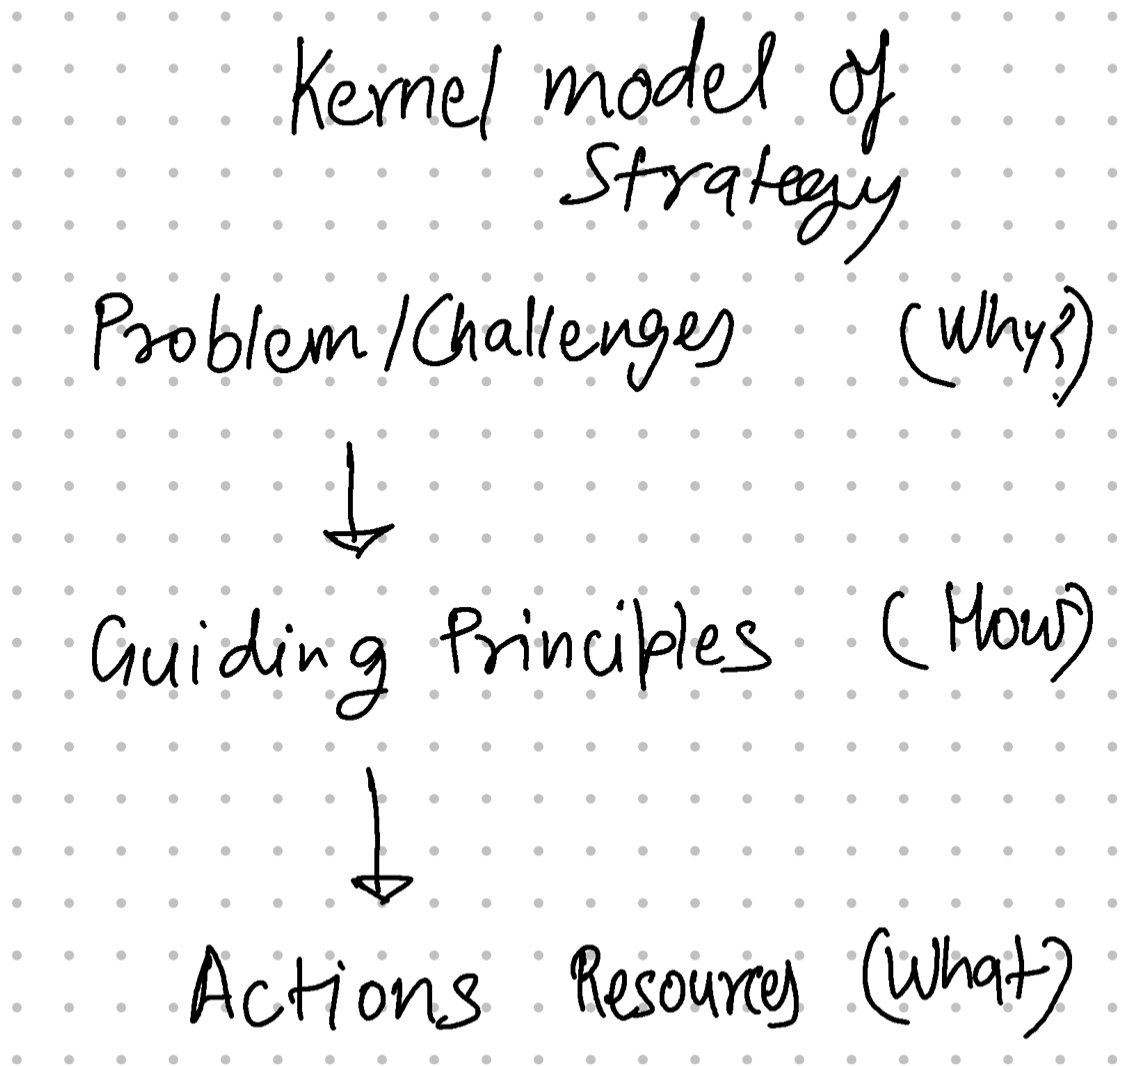 Kernel of a good strategy - Why, How and What